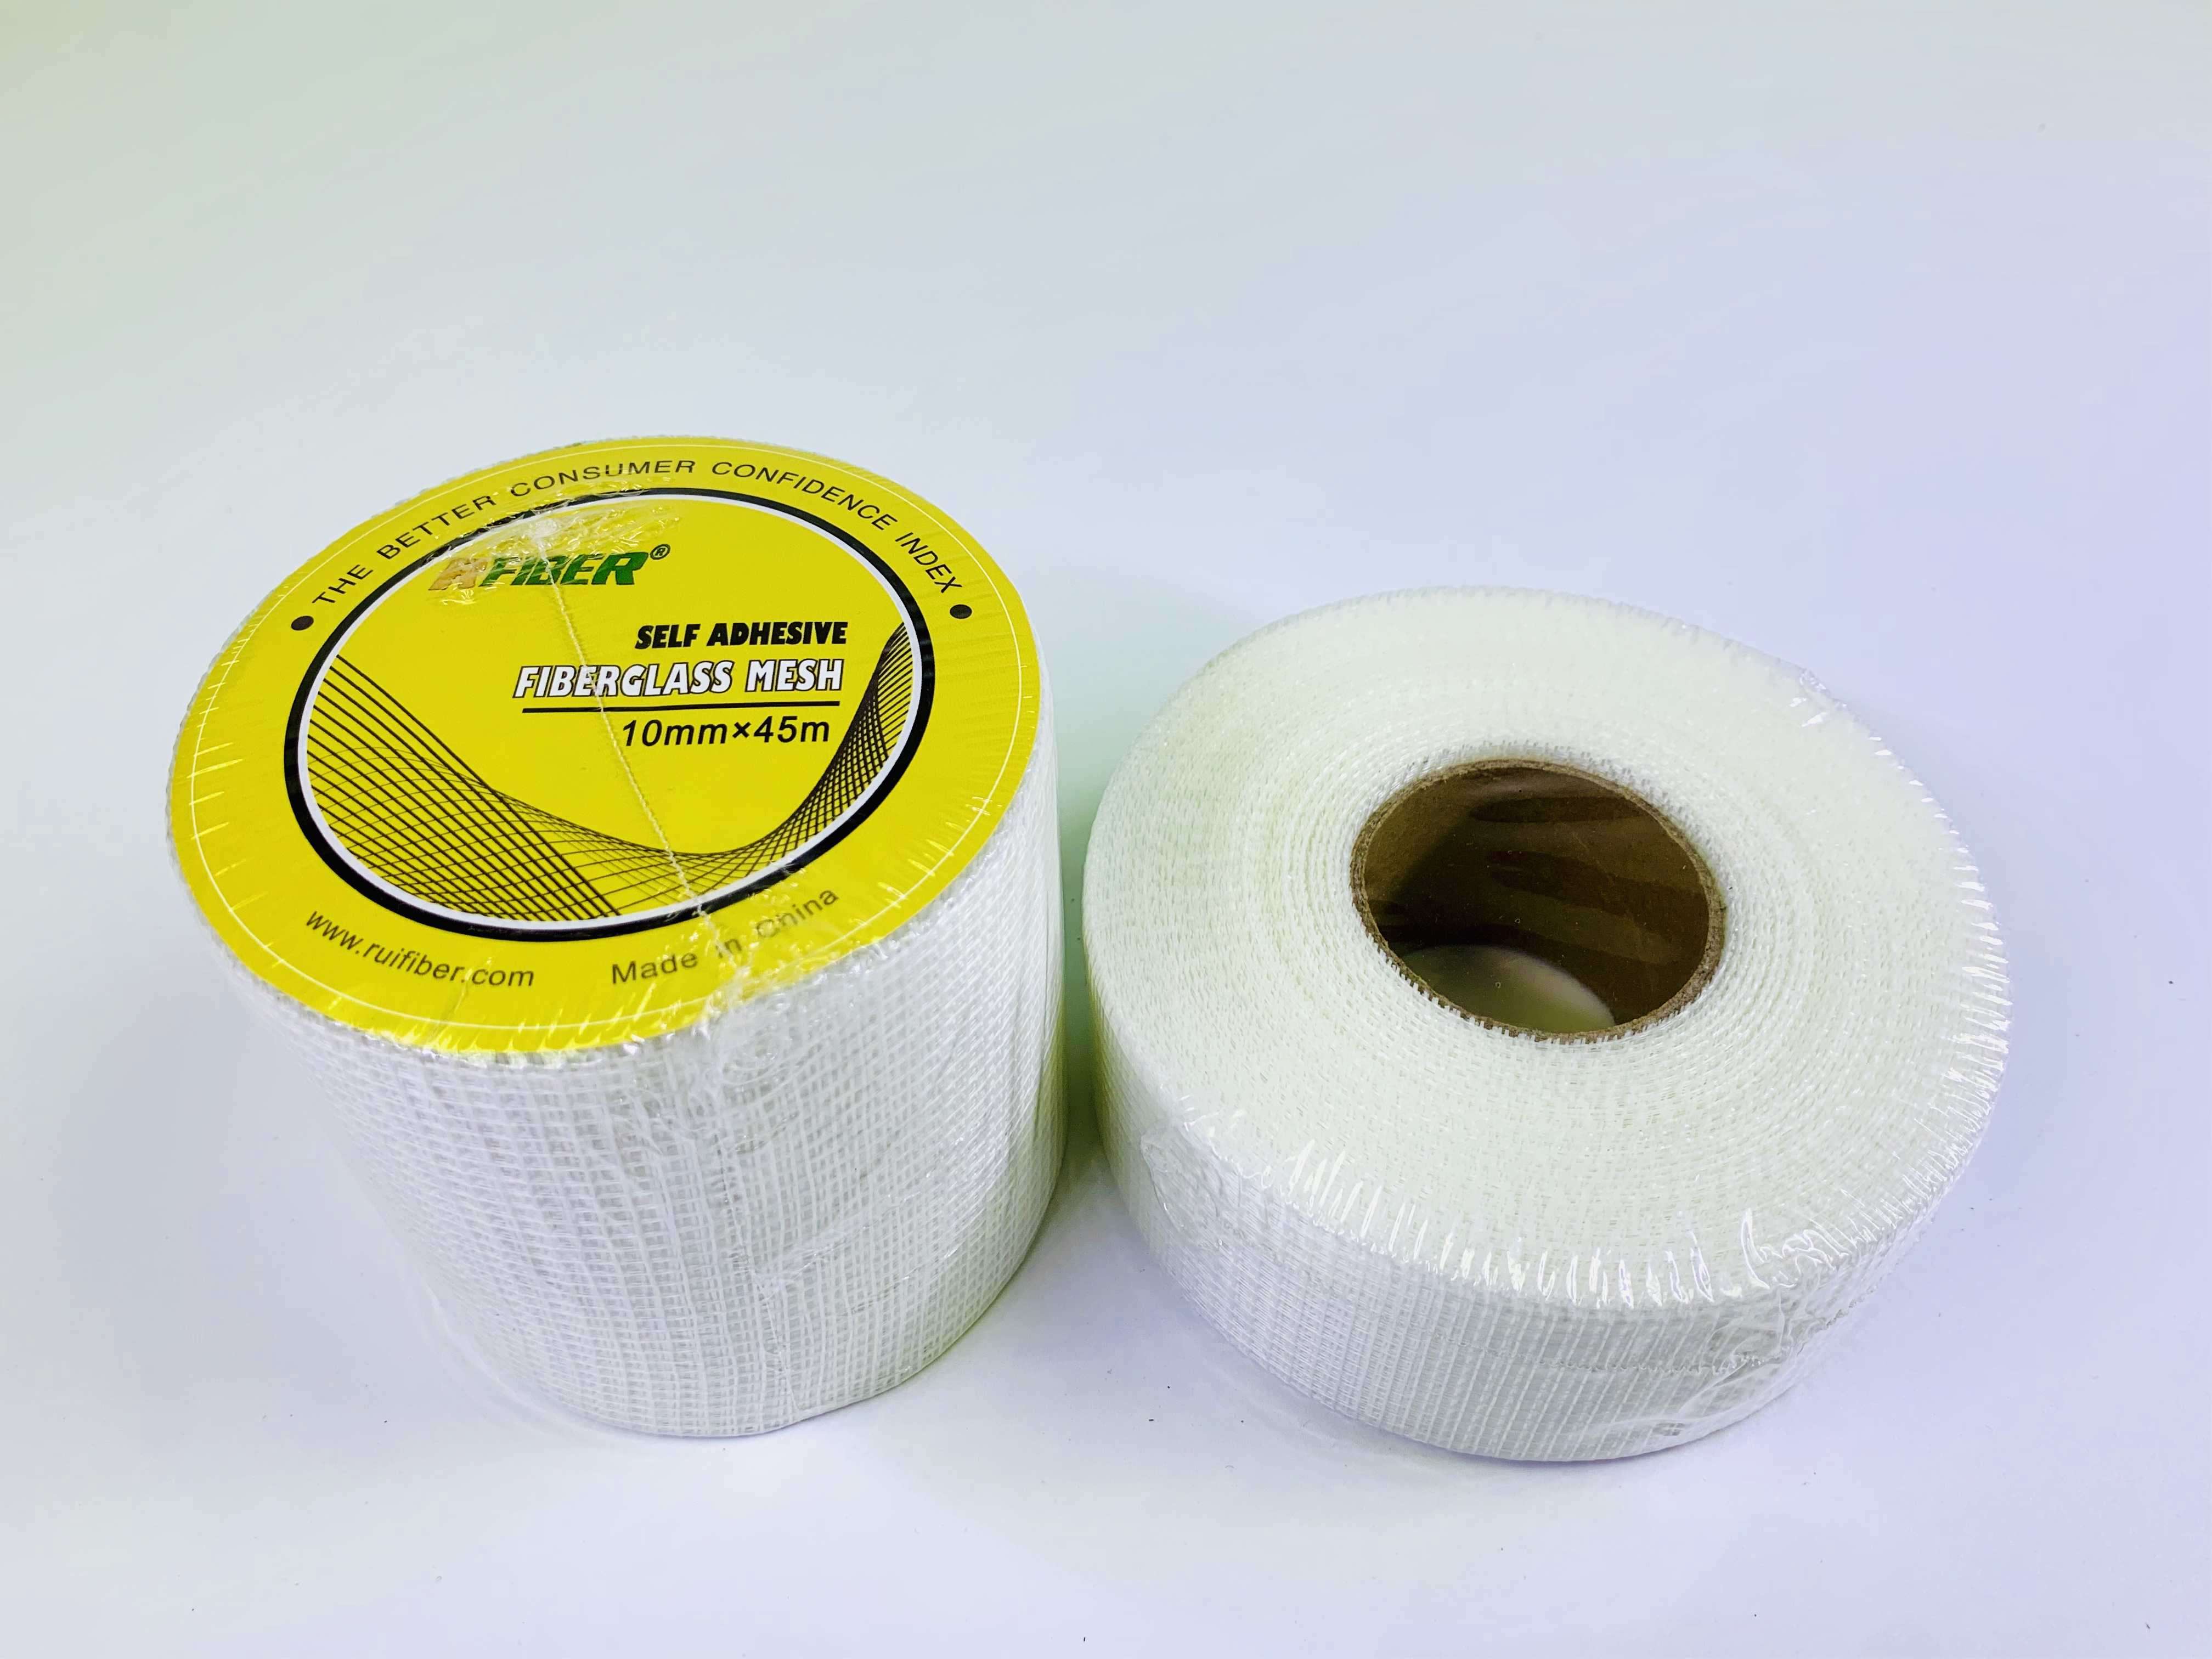 News - The Difference Between Mesh and Paper Drywall Tape